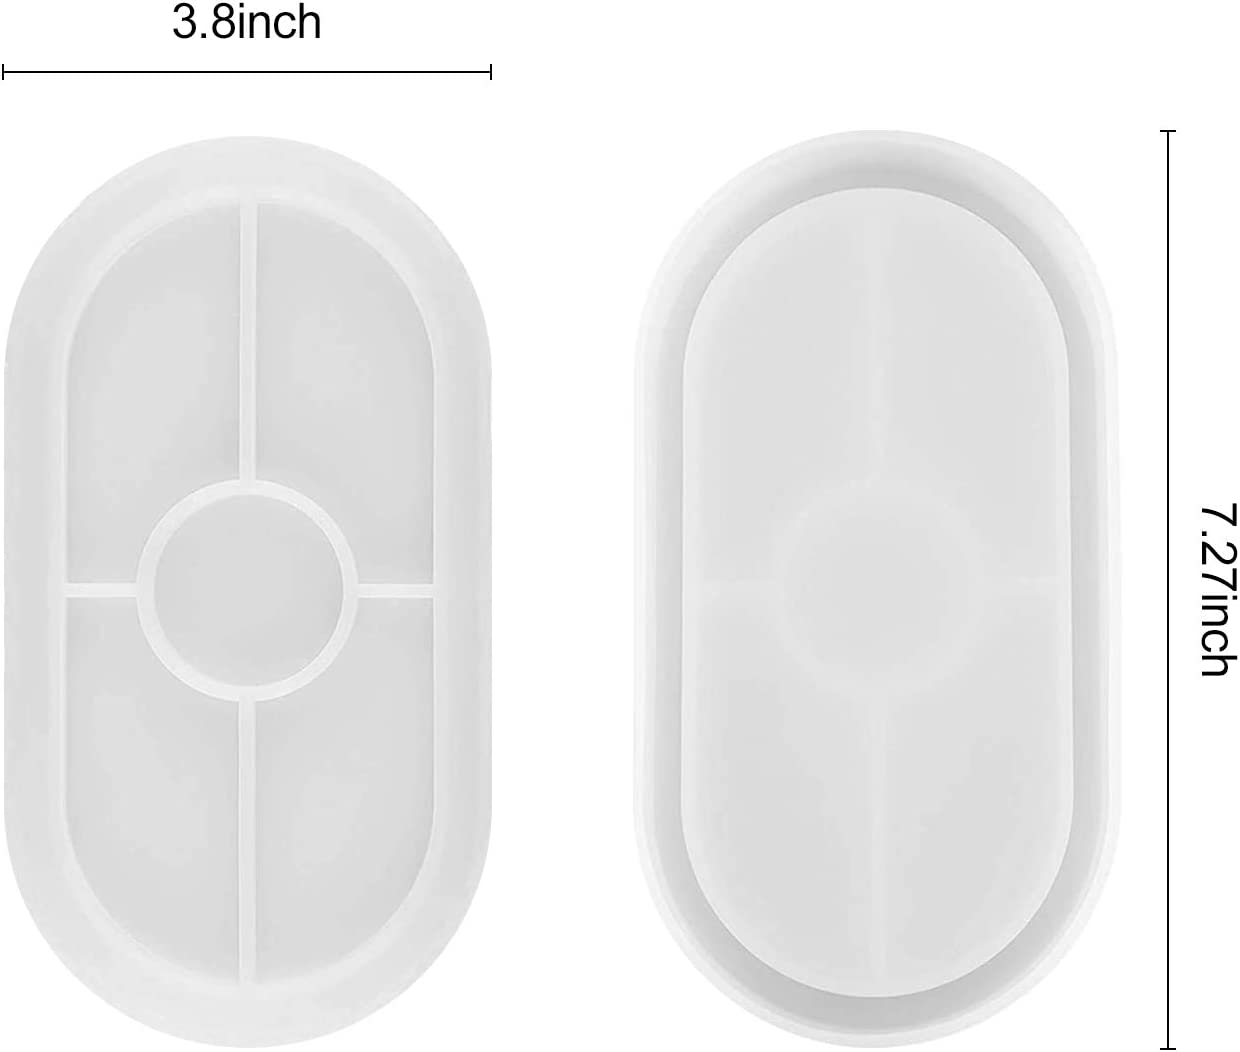 Silicone Mould Oval Trinket Tray